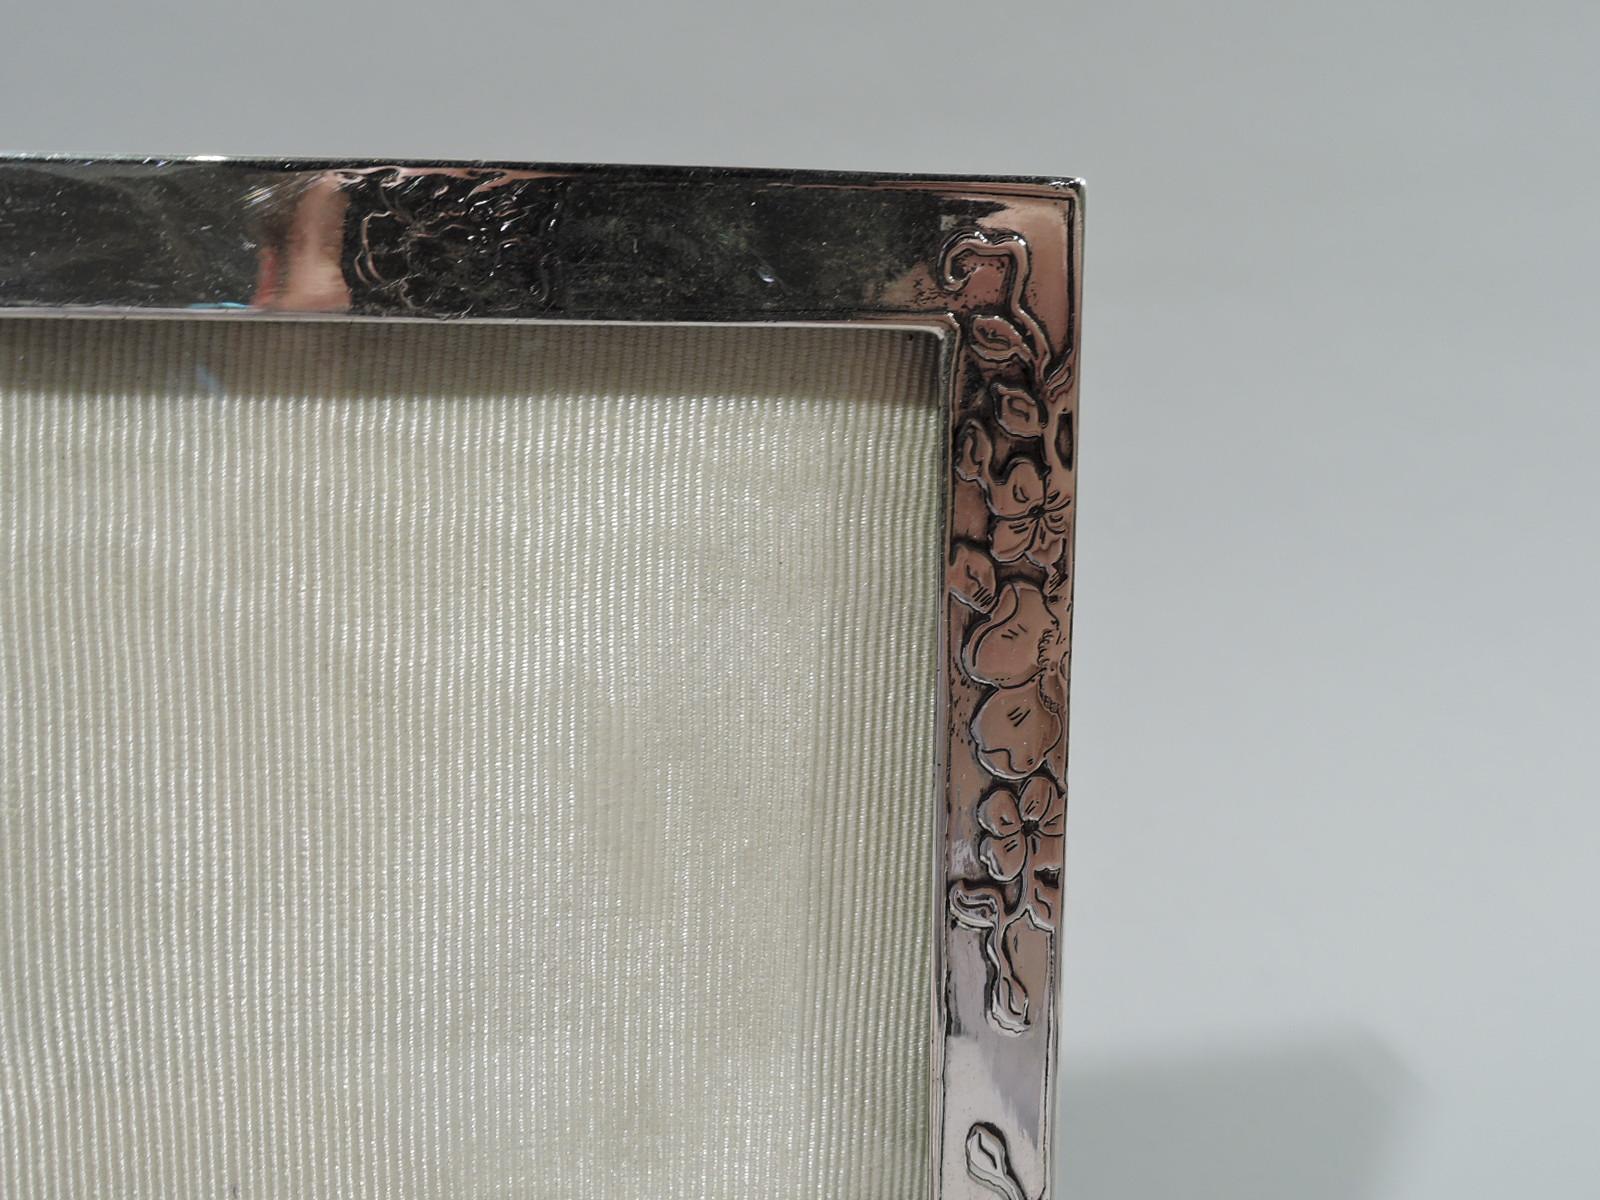 Edwardian Art Nouveau sterling silver picture frame. Made by Tiffany & Co in New York. Rectangular window in flat surround with acid-etched scattered blossoms and garlands on front and sides. At top central frame (vacant). With glass, silk lining,